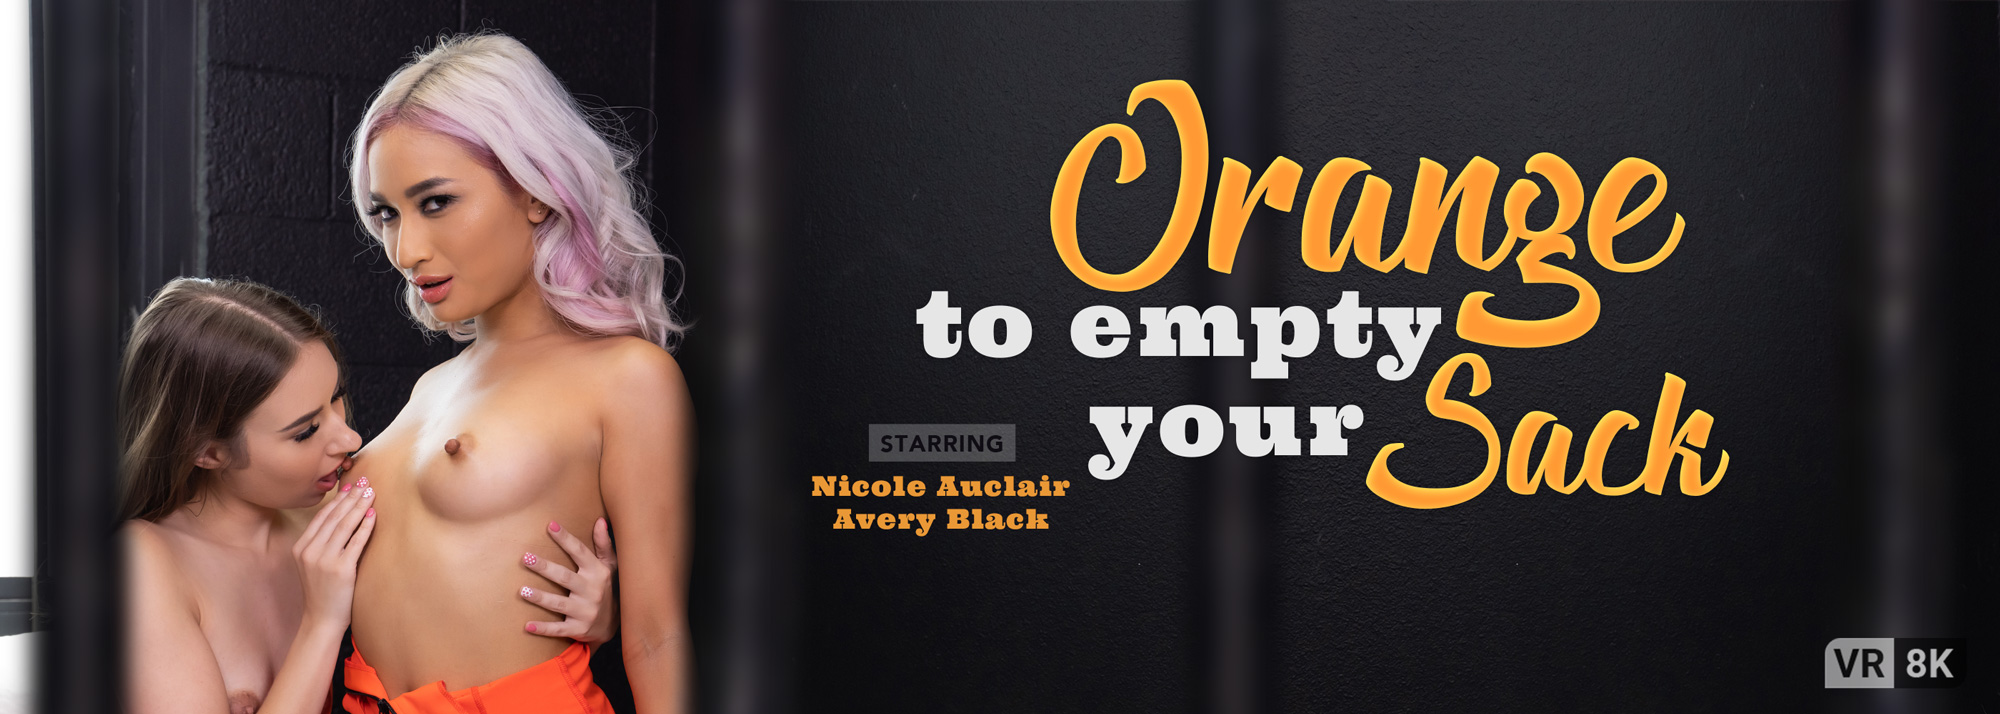 Orange To Empty Your Sack - VR Porn Video, Starring: Avery Black, Nicole Auclair